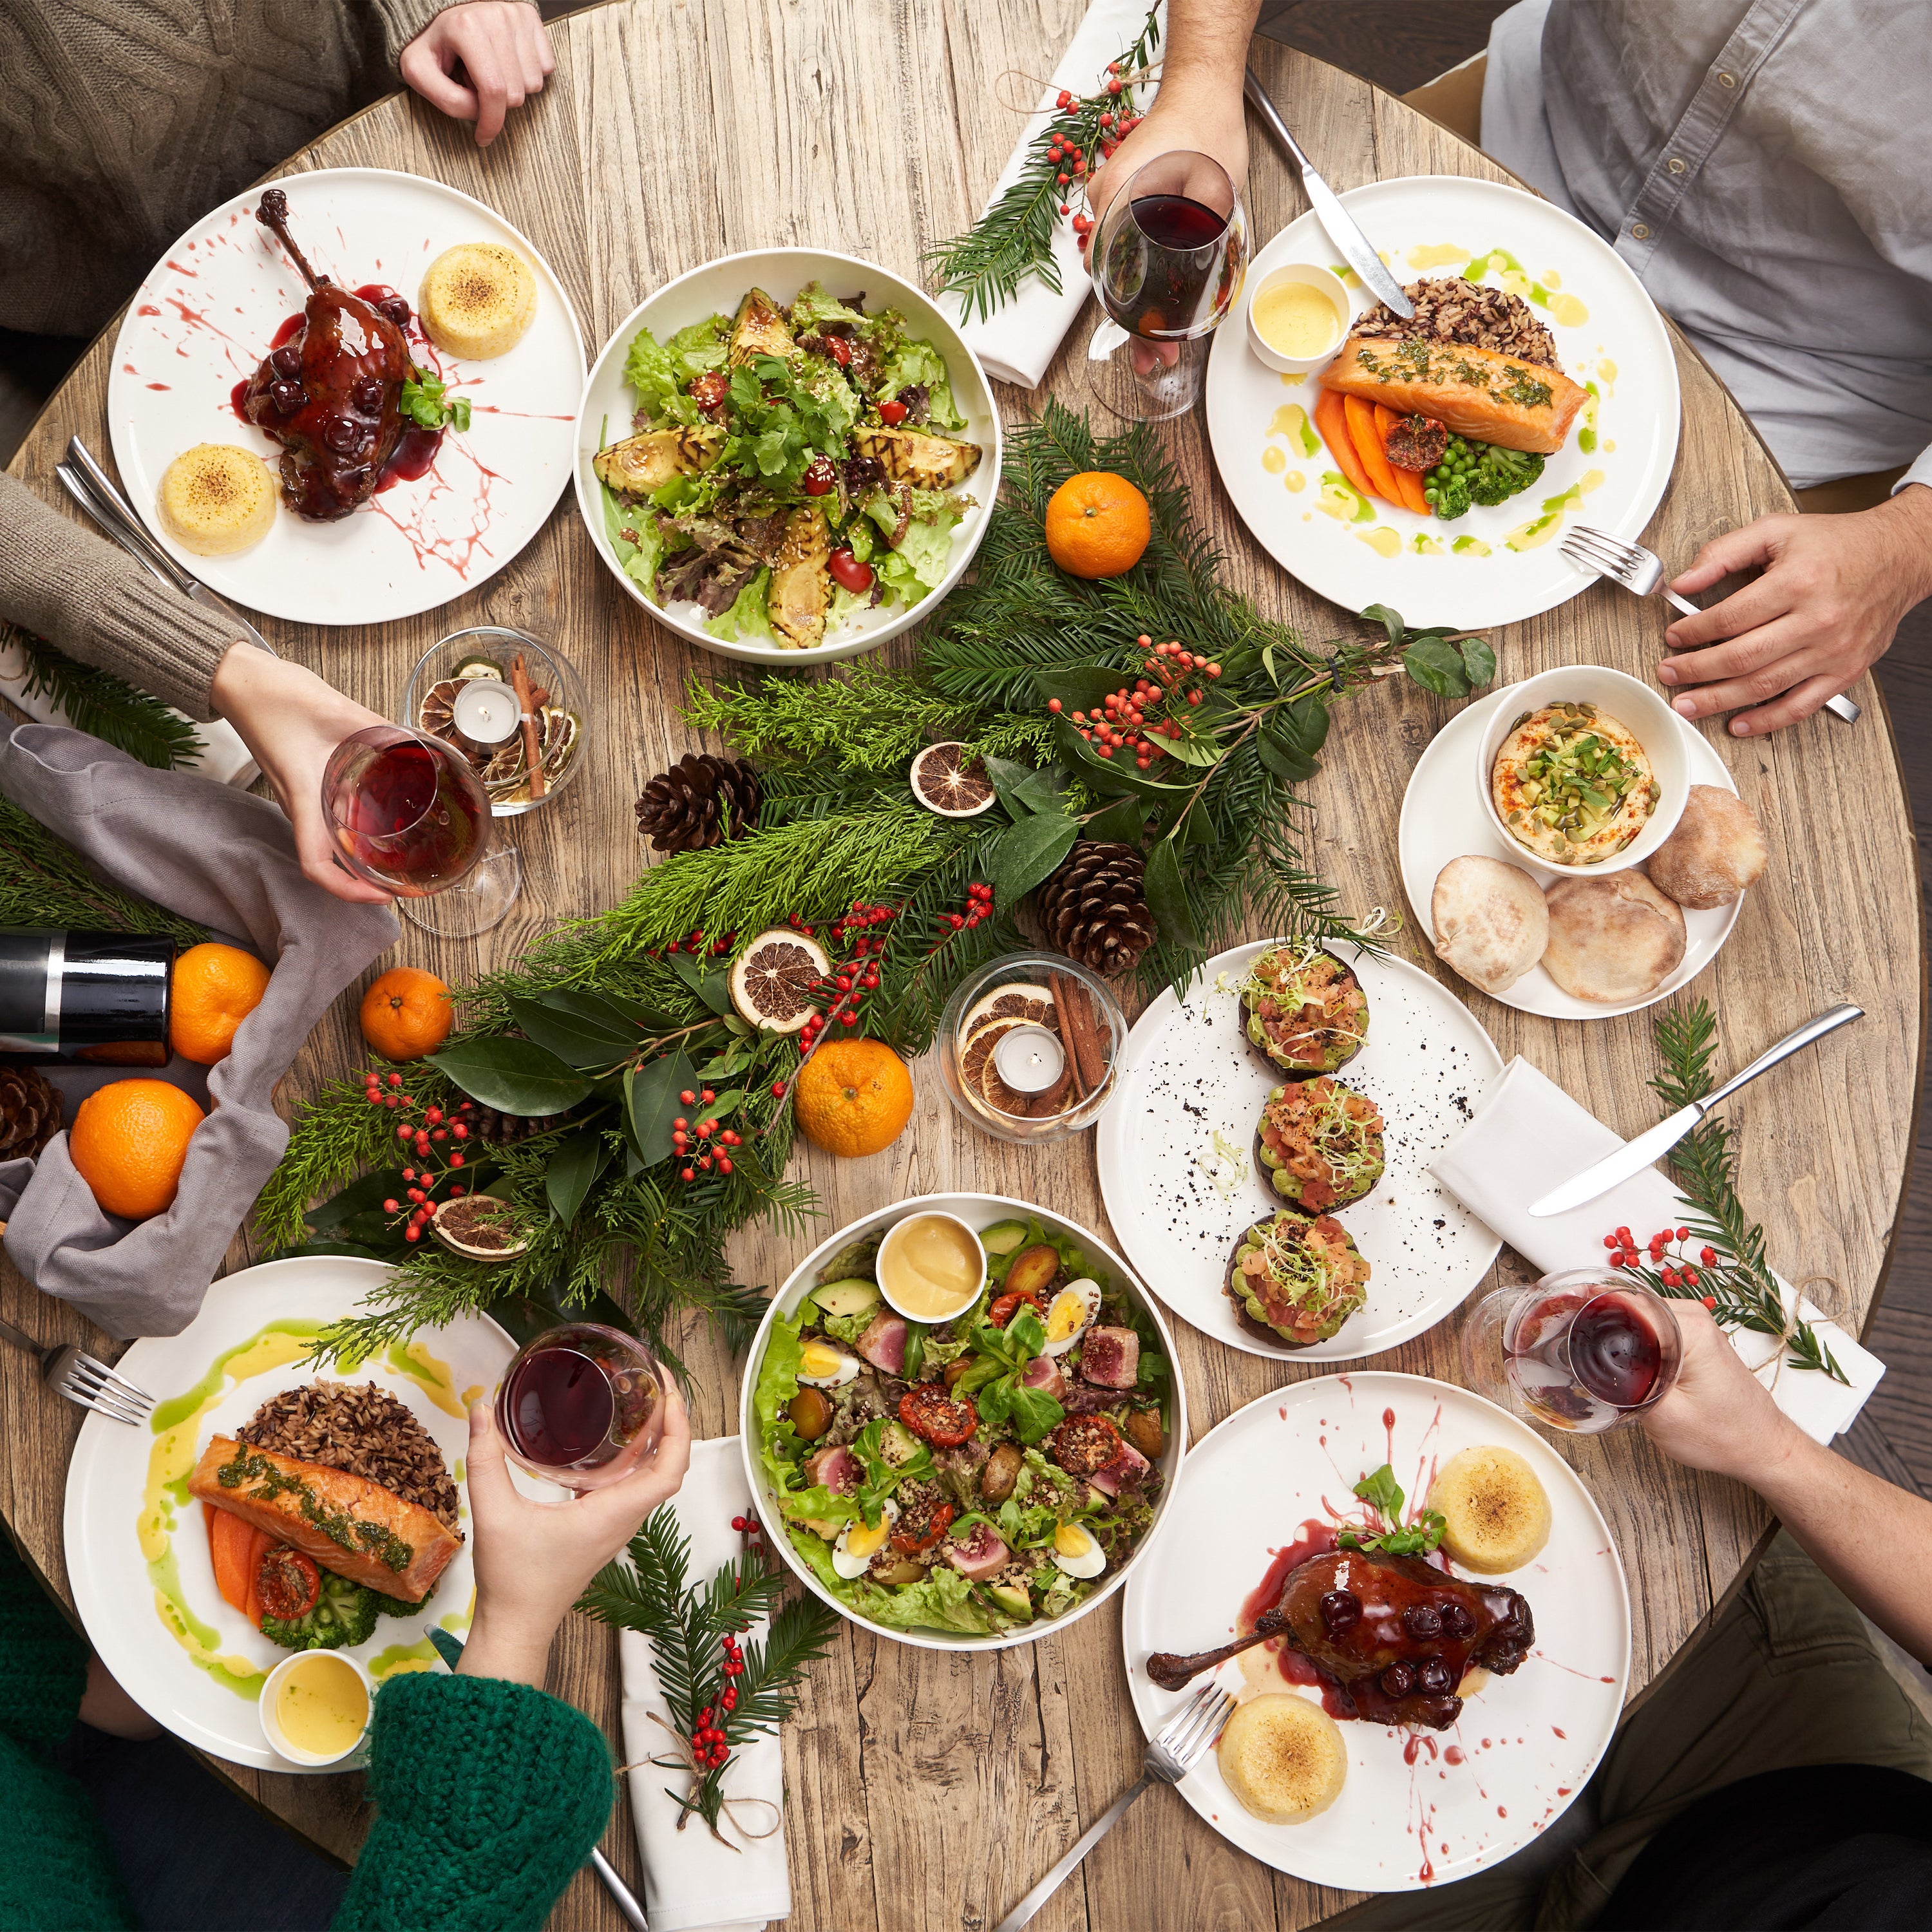 FOOD AND CHOLESTEROL DURING THE HOLIDAYS